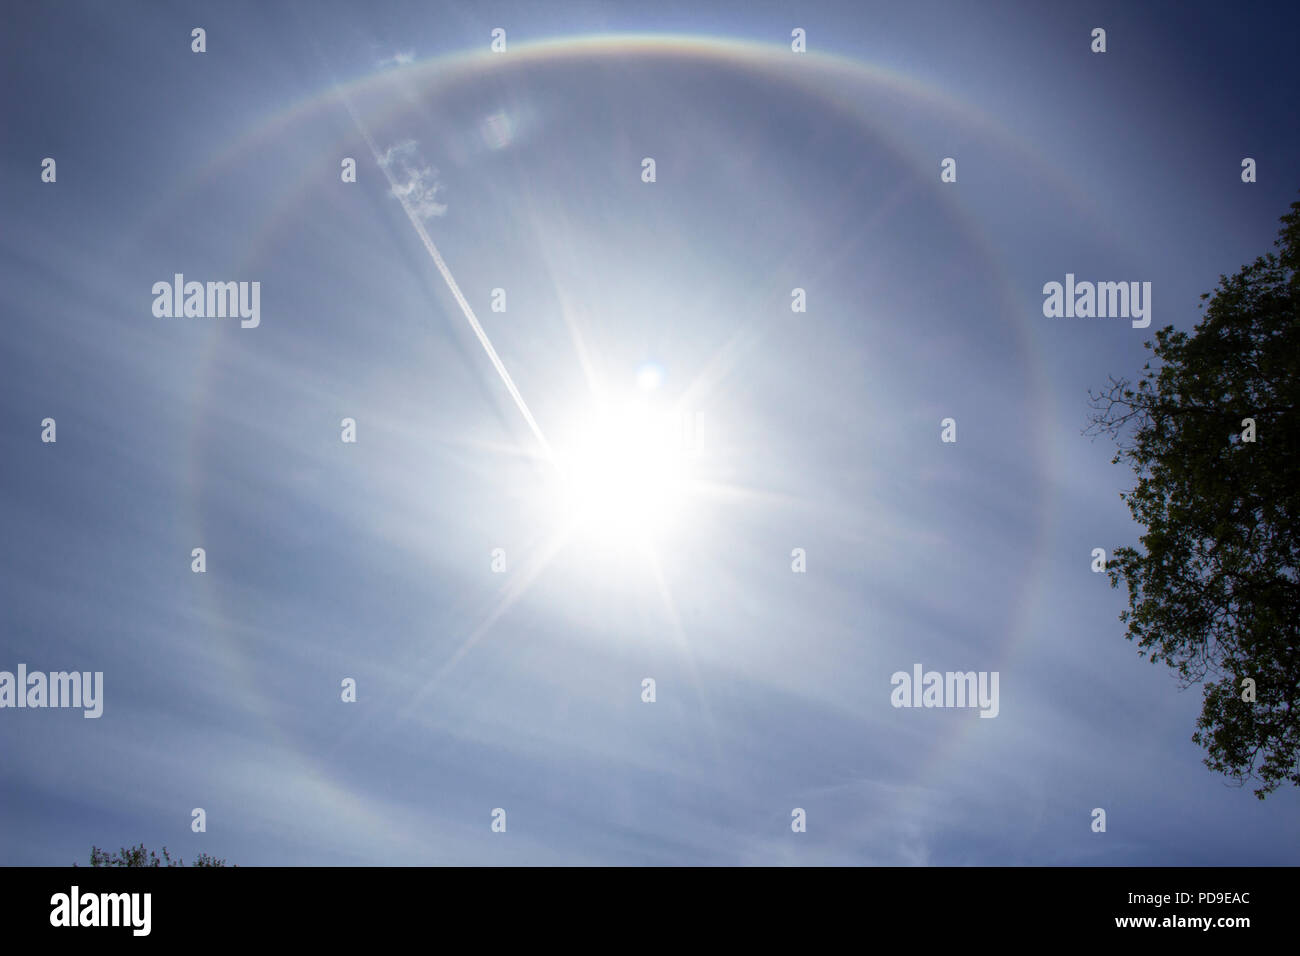 Stockholm, Sweden - August 6 2018: Circular rainbow around the sun - which has an airplane flying into it. Meteorological phenomenon. Stock Photo